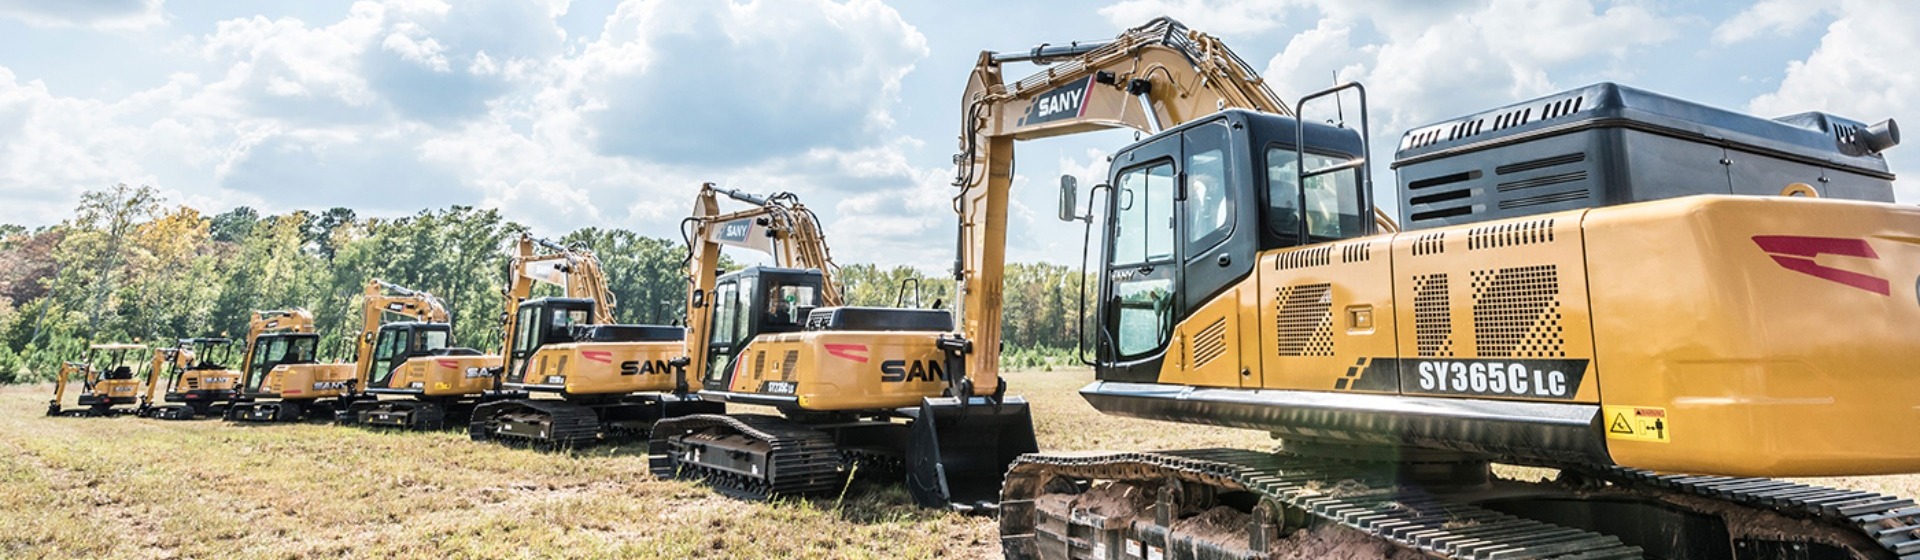 Sany Excavators in Darwin: Built to deliver efficiency, safety and performance